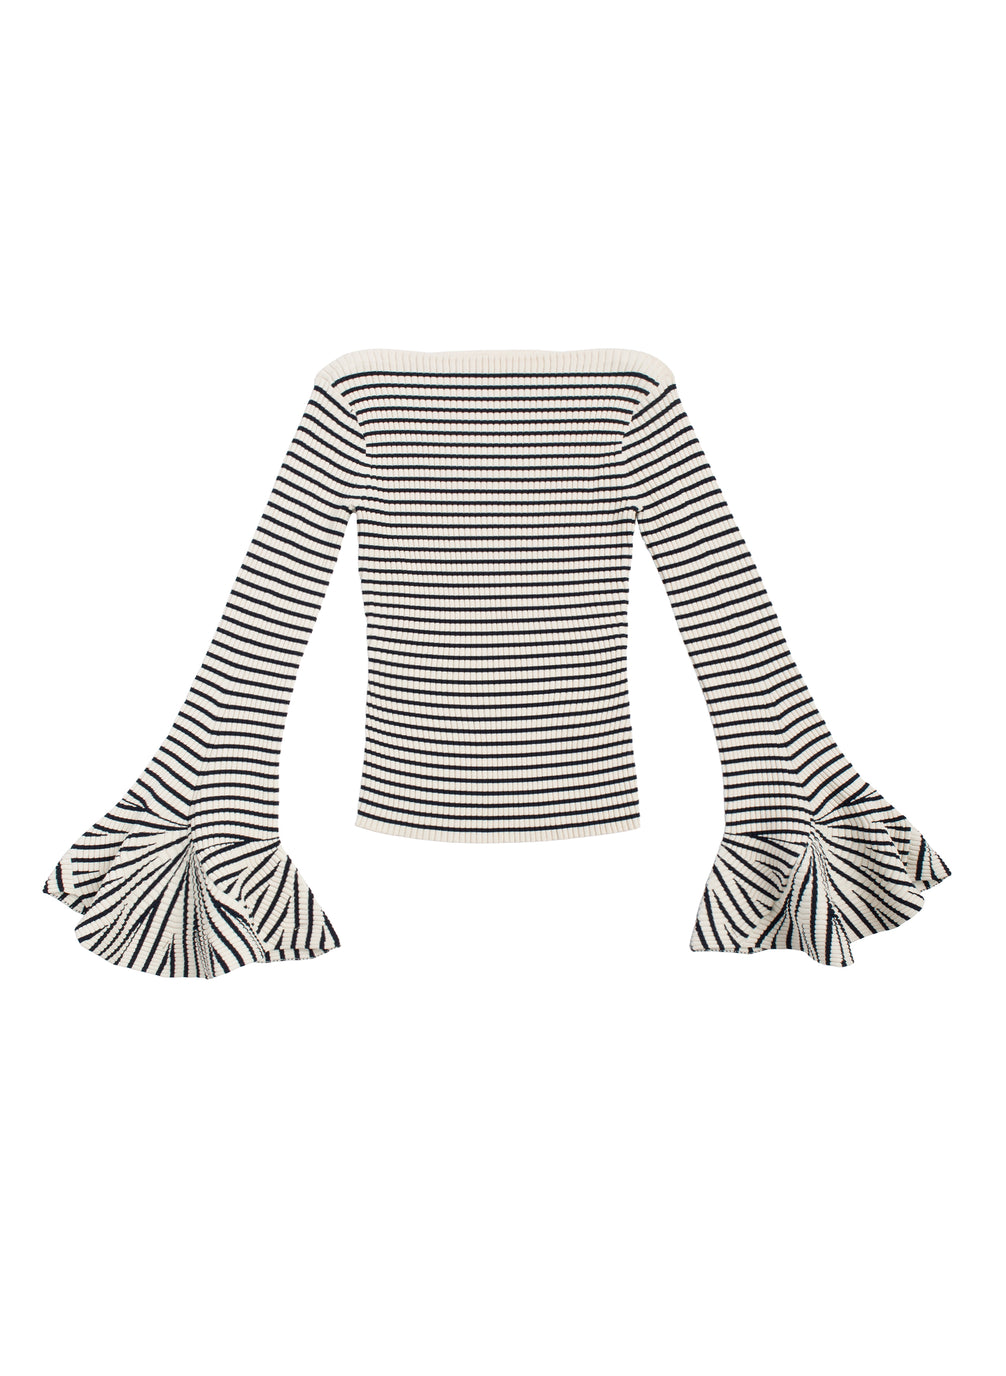 flaylay of striped knit long bell sleeve top